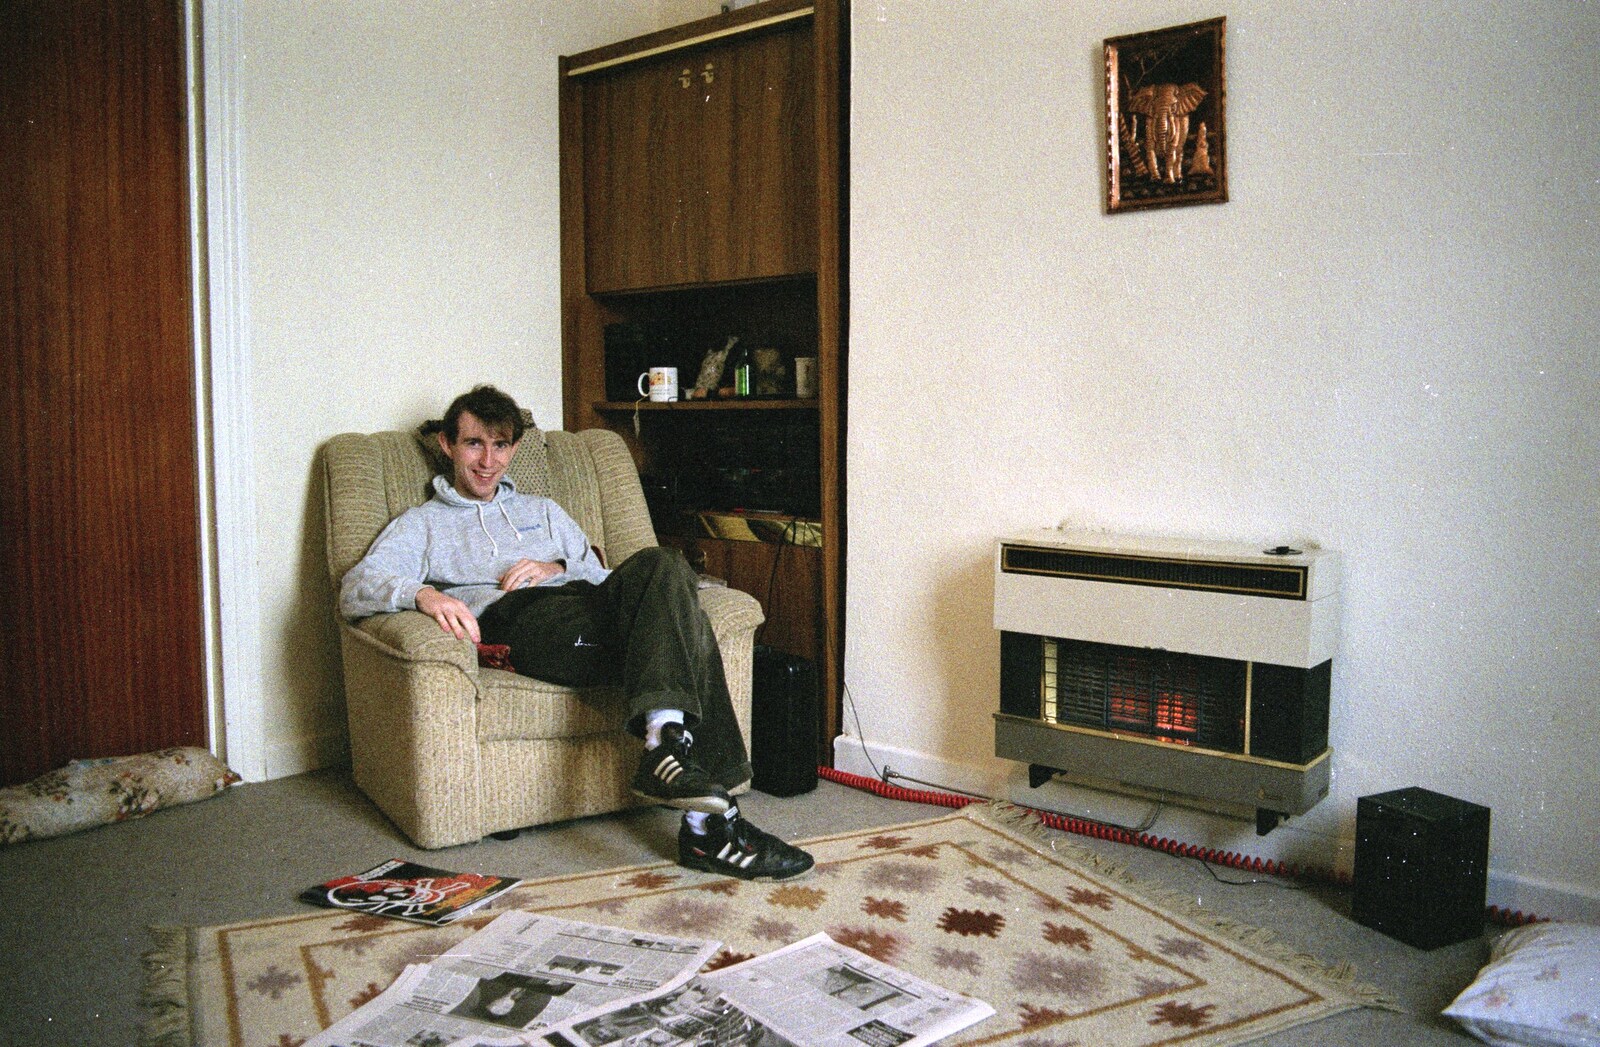 A Trip to Plymouth and Bristol, Avon and Devon - 18th February 1990: Dave in his Bristol digs, gas fire glowing